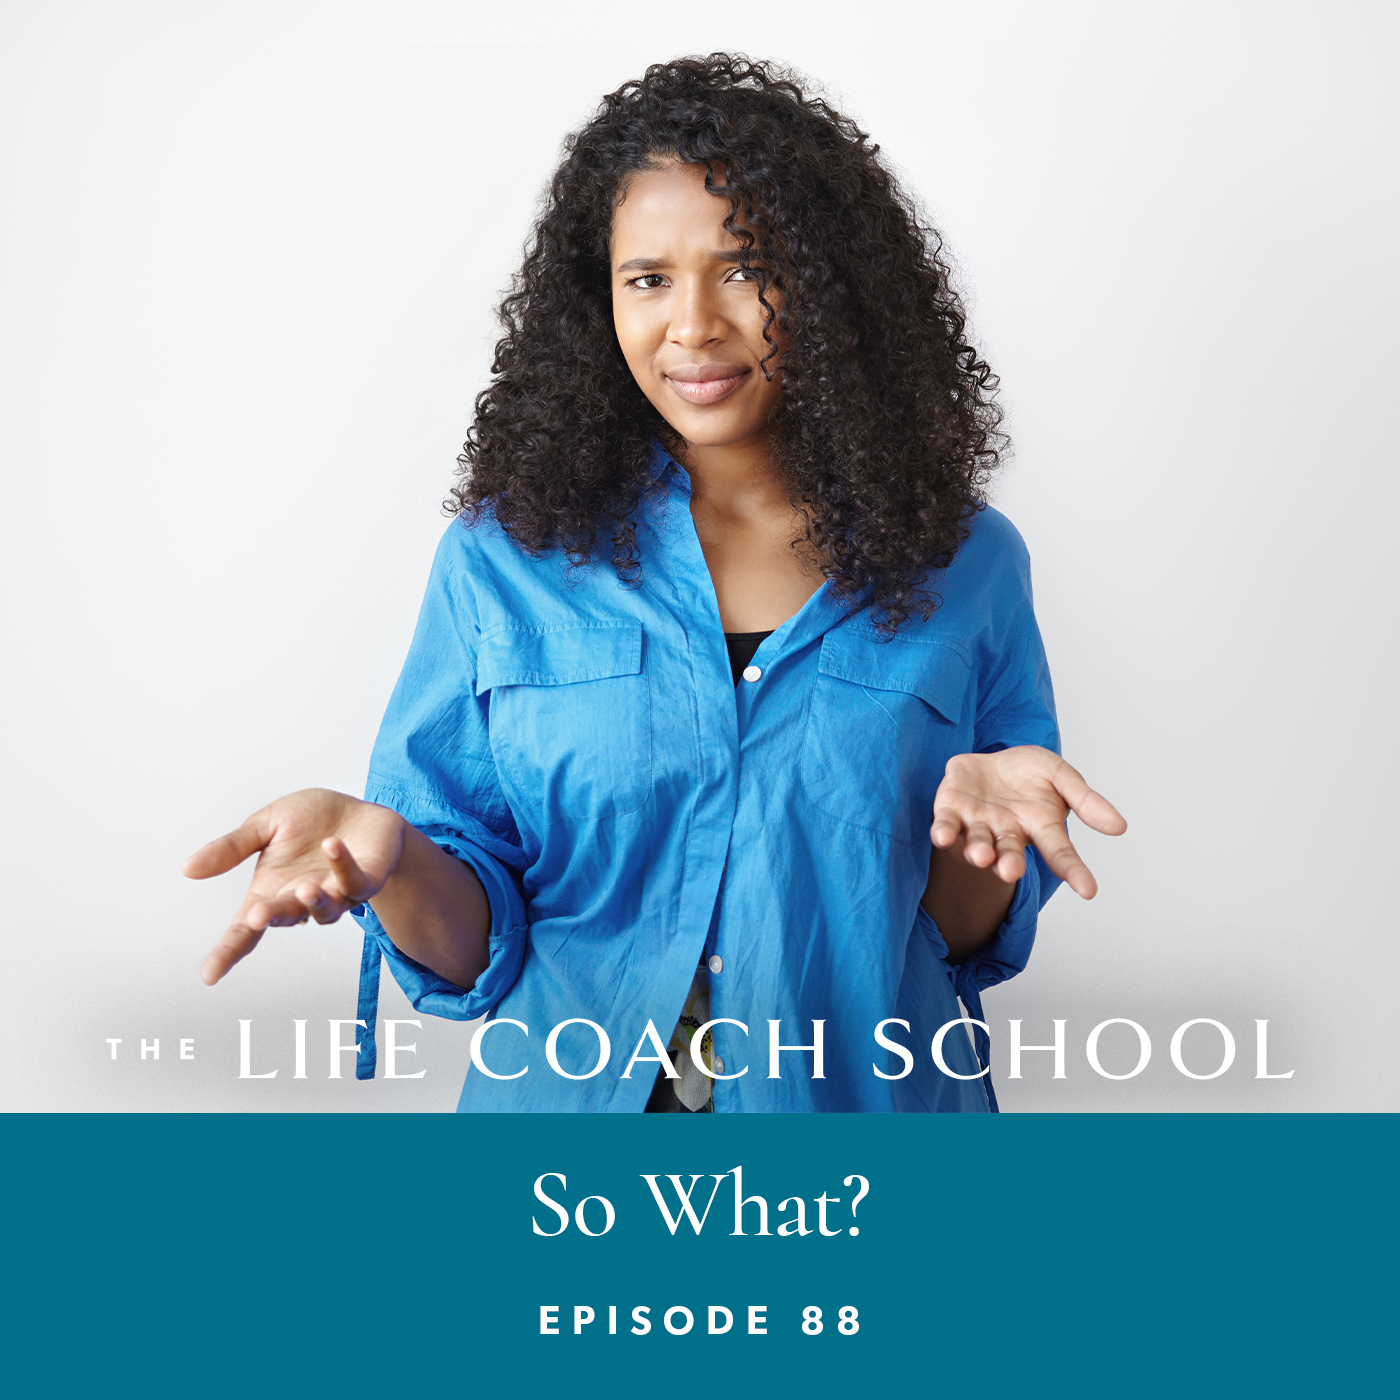 The Life Coach School Podcast with Brooke Castillo | Episode 88 | So What?